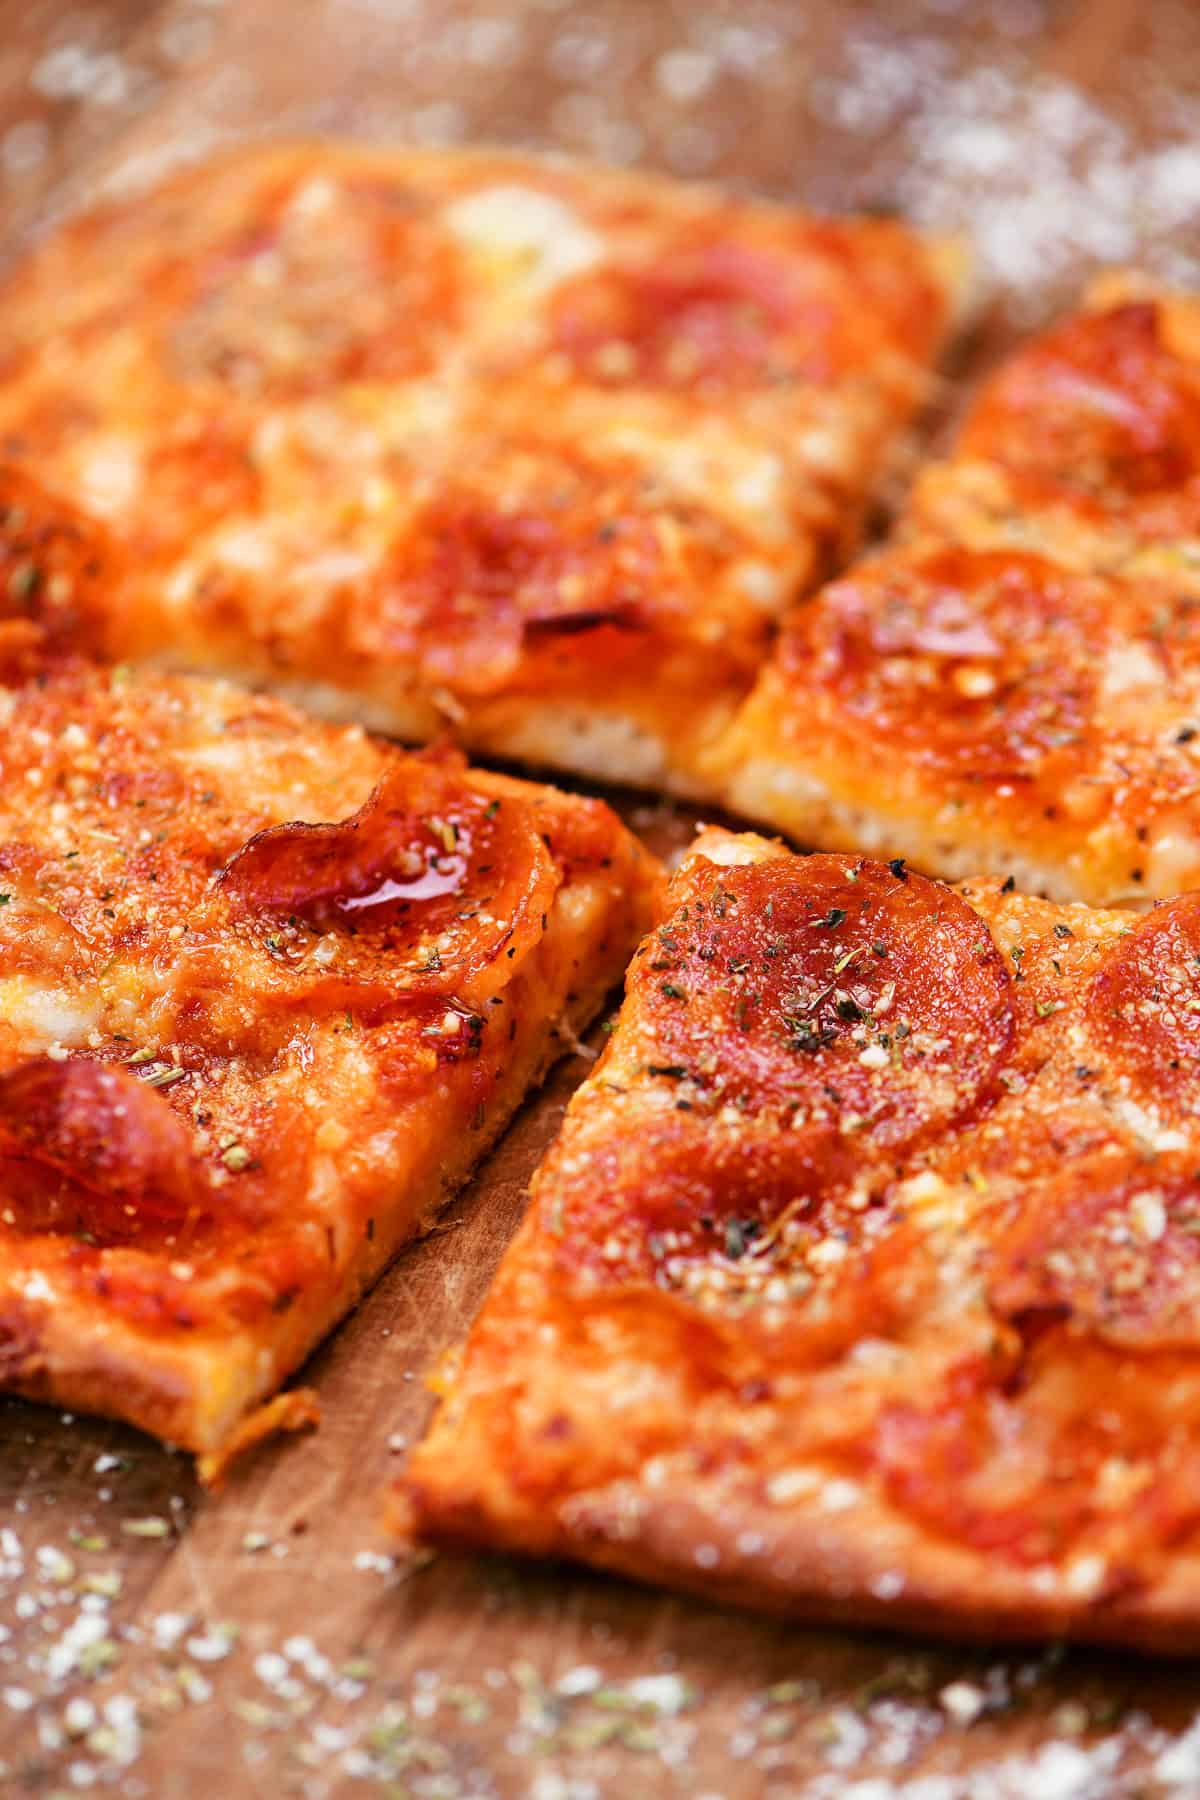 Pepperoni pizza made with refrigerated dough.